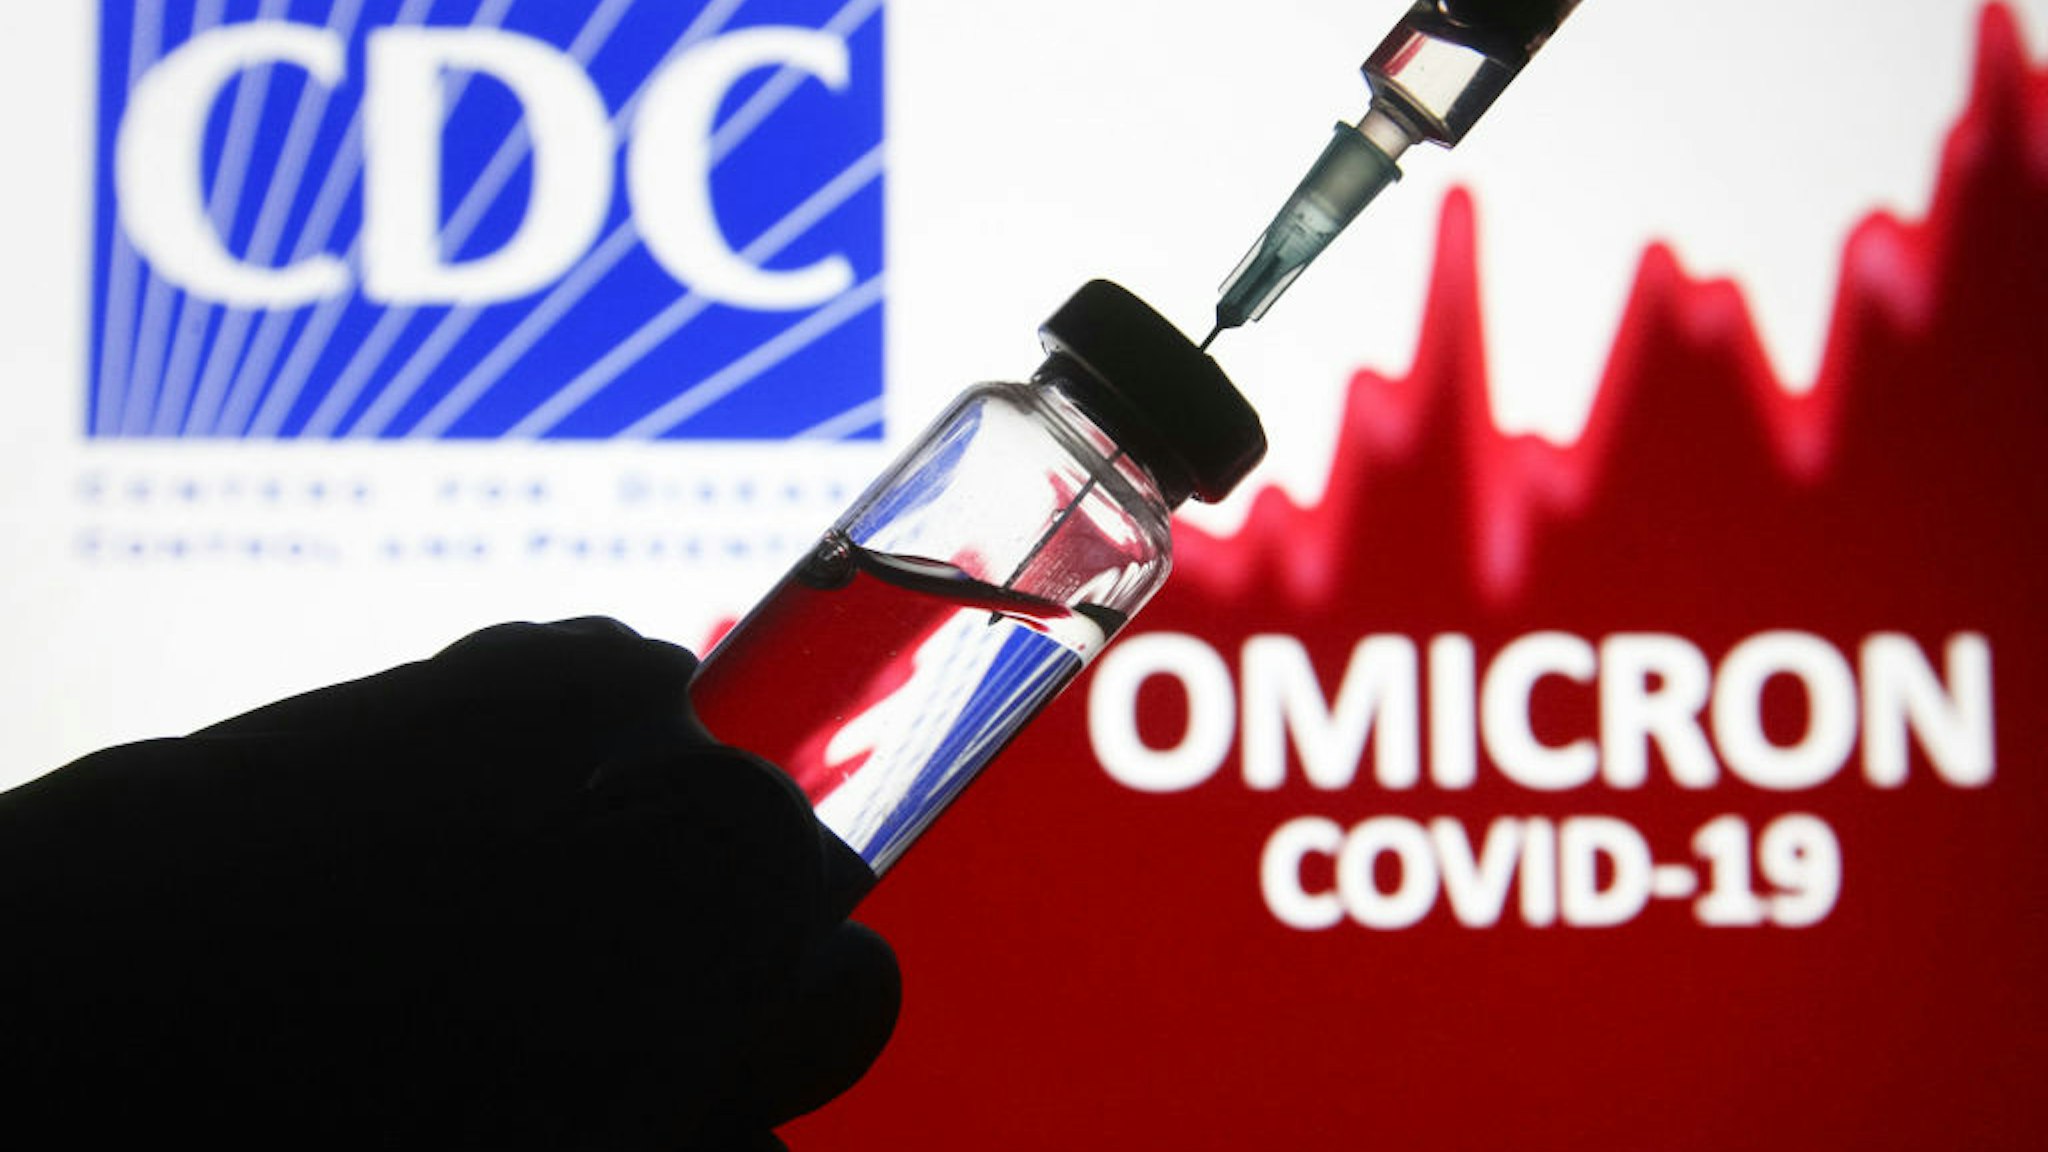 UKRAINE - 2021/12/05: In this photo illustration, a hand extracting a dose of vaccine from a vial is seen in front of the words Omicron covid-19 with a logo of CDC in the background. Omicron (B.1.1.529), a new SARS-CoV-2 variant of concern continues to spread worldwide. (Photo Illustration by Pavlo Gonchar/SOPA Images/LightRocket via Getty Images)